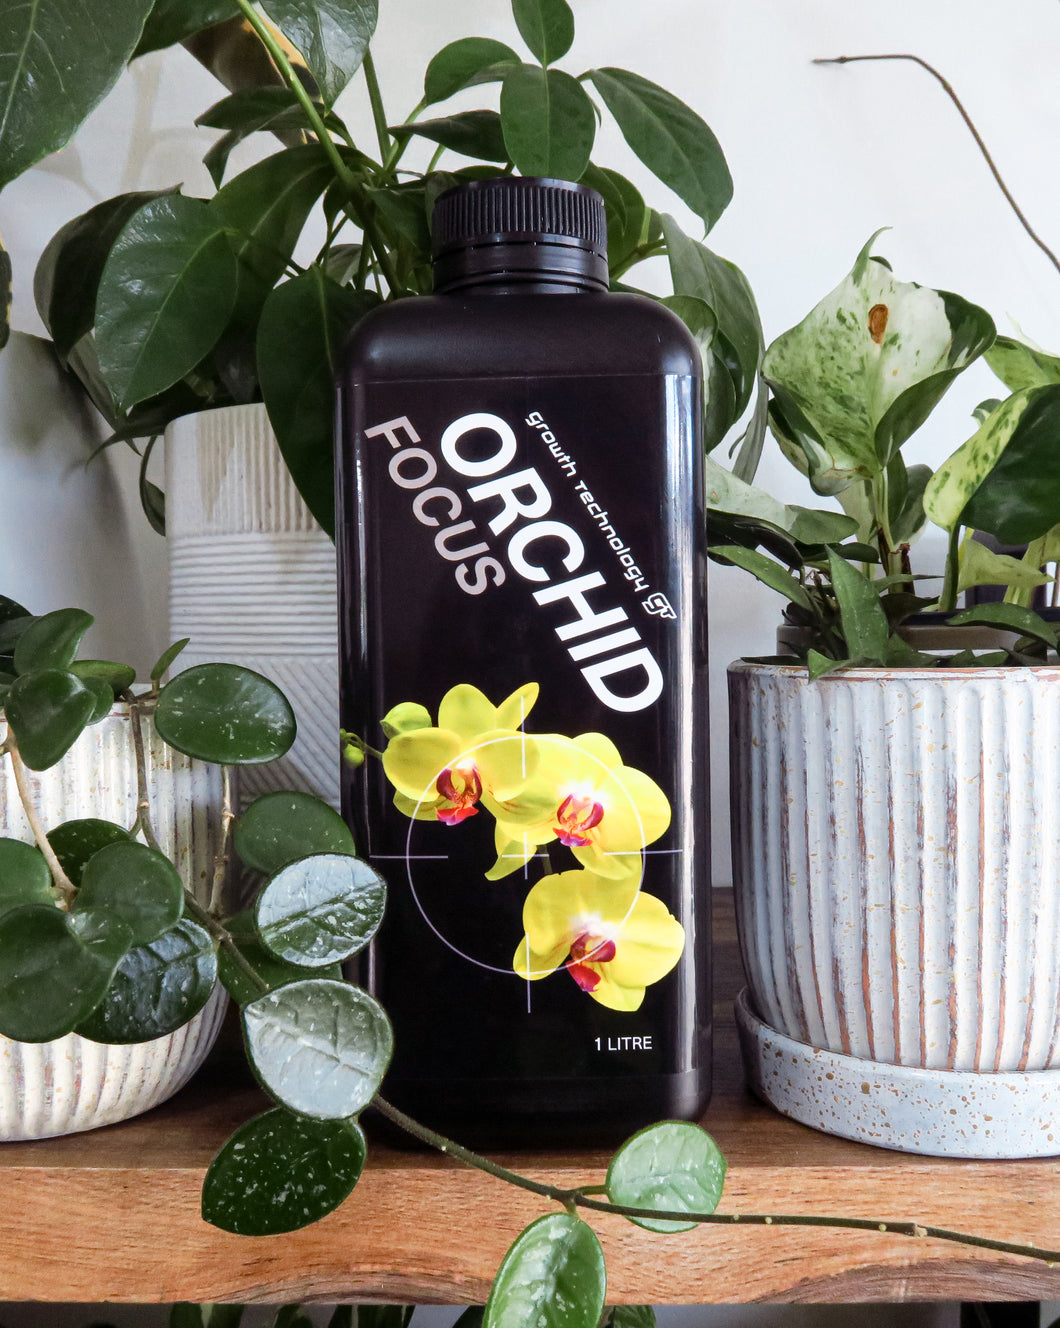 GT ORCHID Focus plant food from Growth Technology 1 ltr